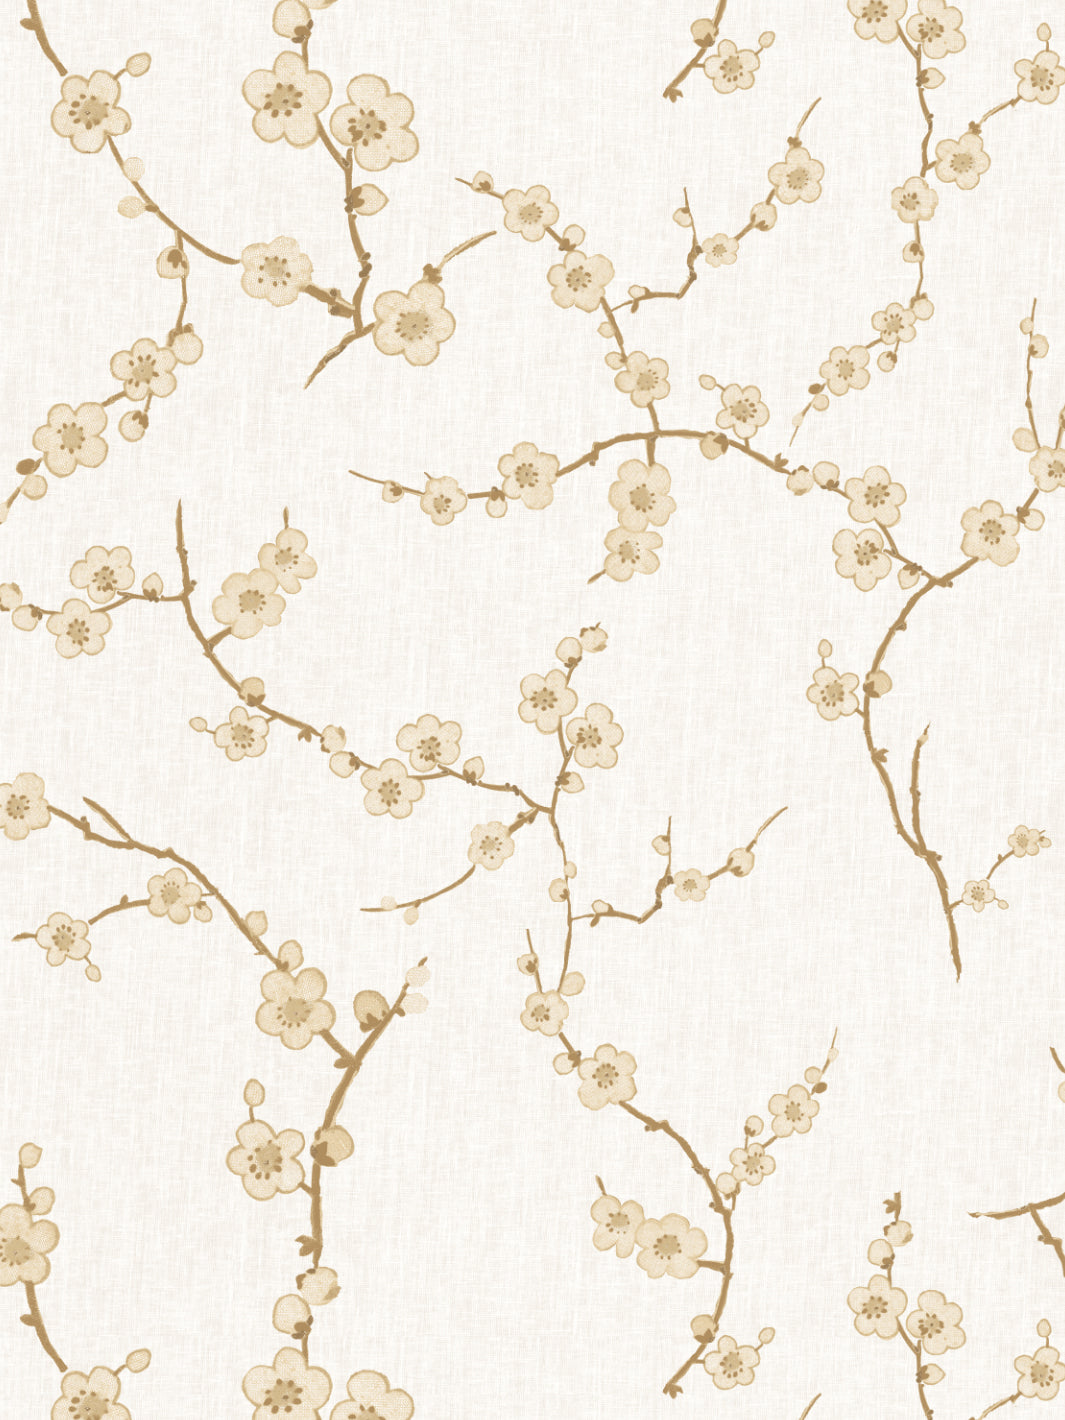 'Cherry Blossom' Wallpaper by Nathan Turner - Gold